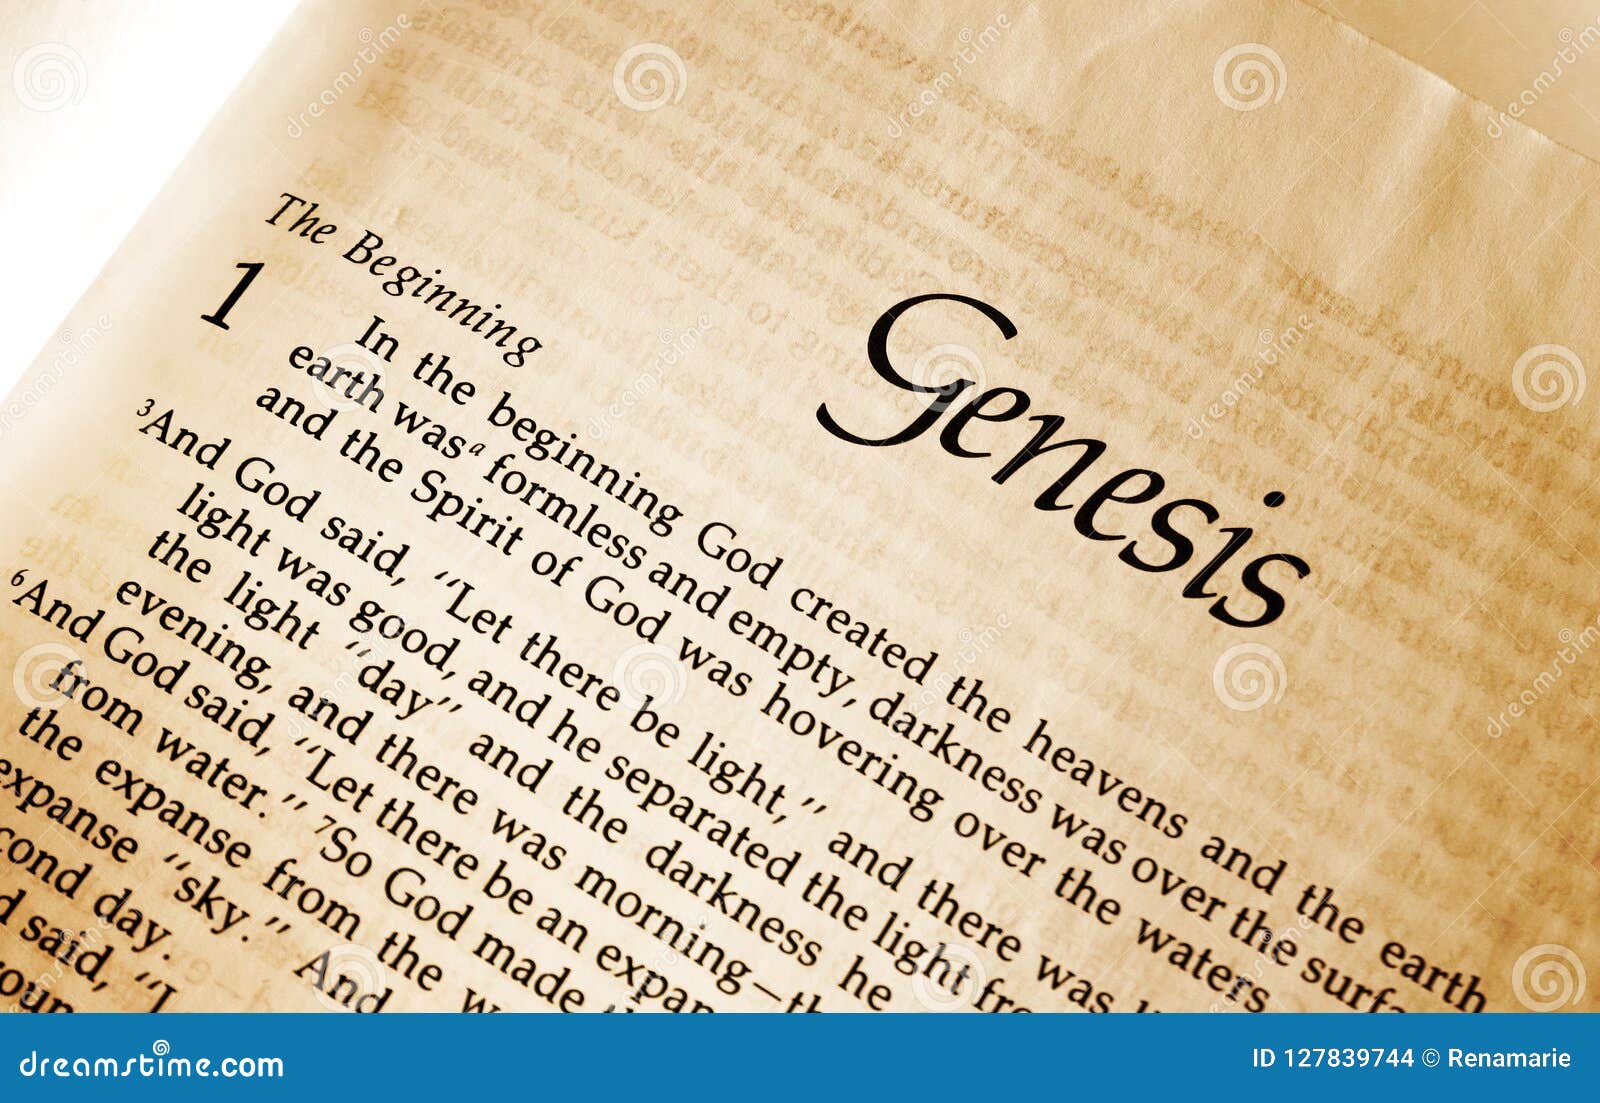 Open Page In The Bible Showing Genesis Chapter One Verse One - In The